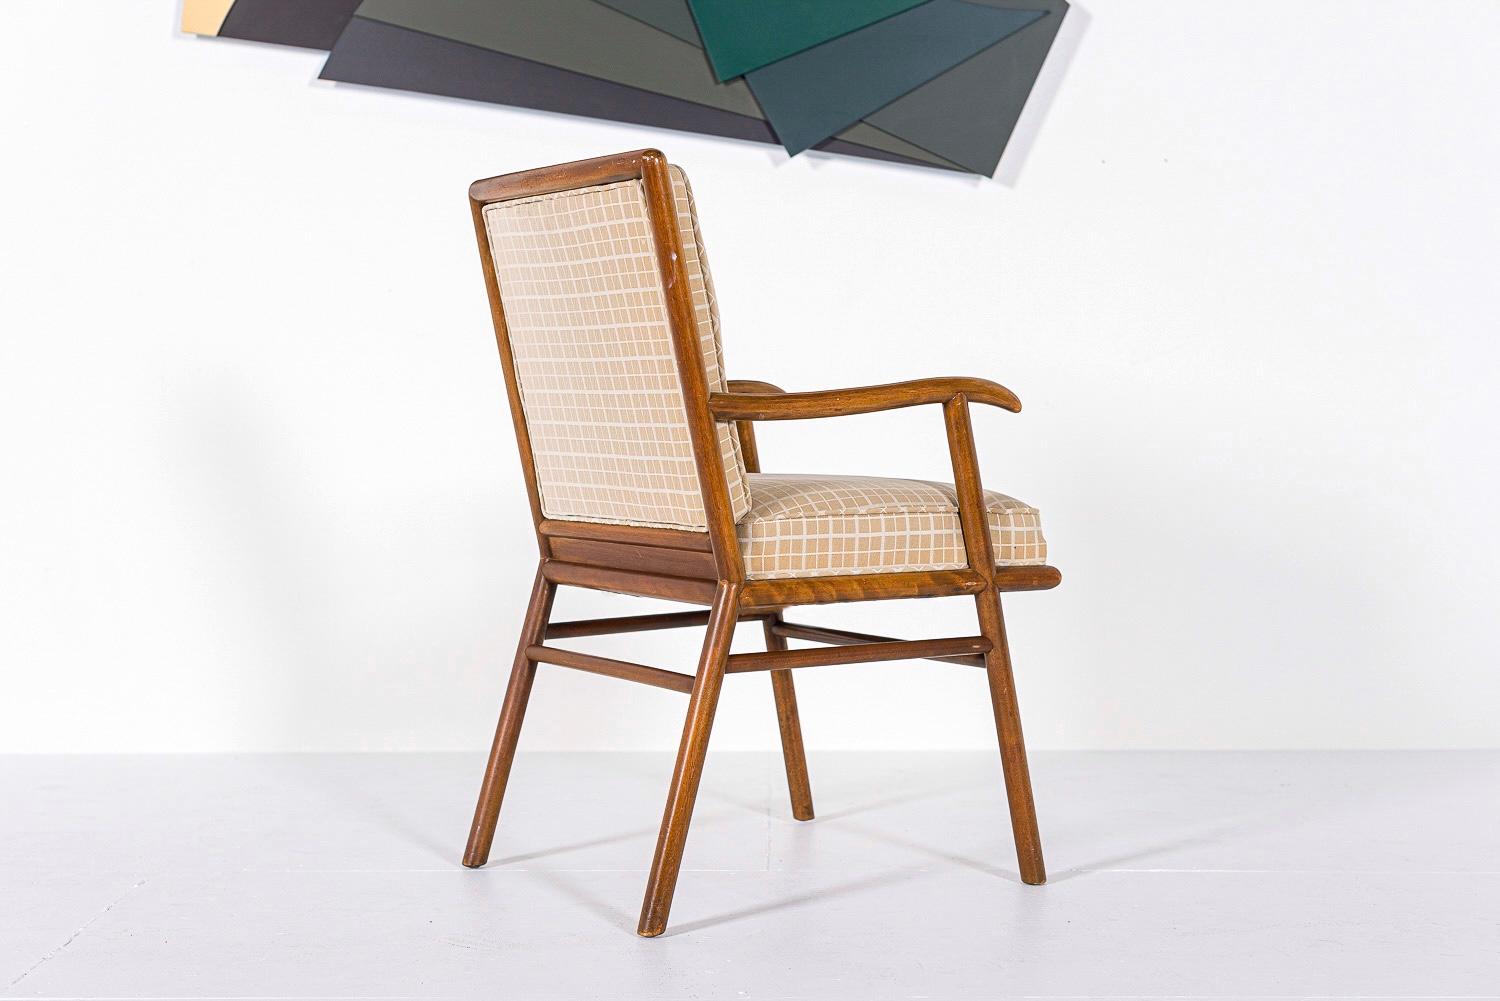 Midcentury Upholstered Wood Lounge Chair by Robsjohn-Gibbings for Widdicomb In Good Condition For Sale In Detroit, MI